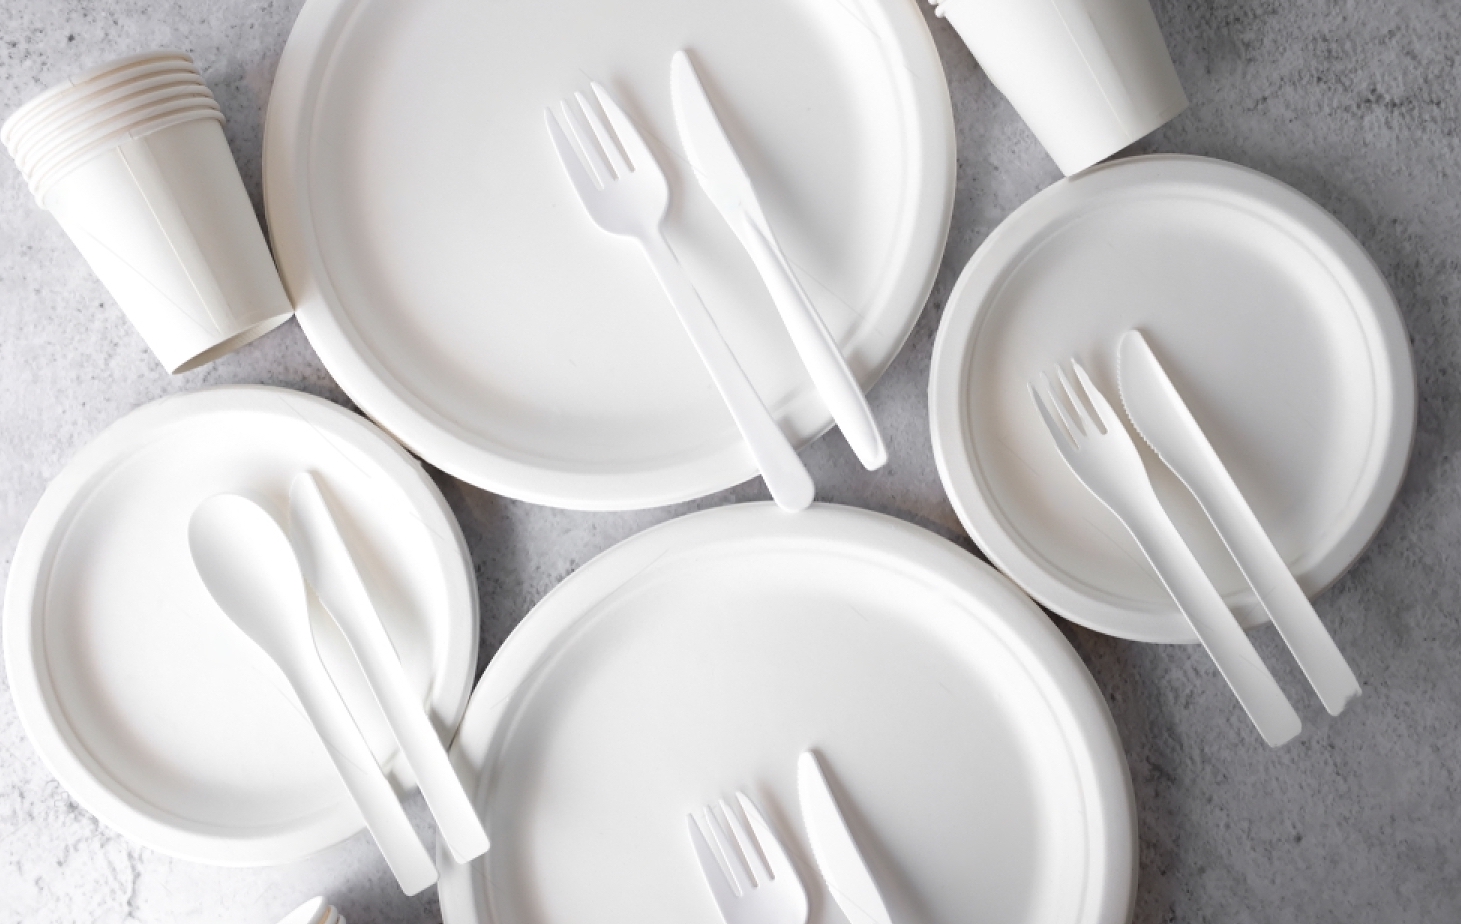 stock-photo-set-of-empty-reusable-disposable-eco-friendly-plates-cups-utensils-on-light-white-and-grey-1351796321-transformed